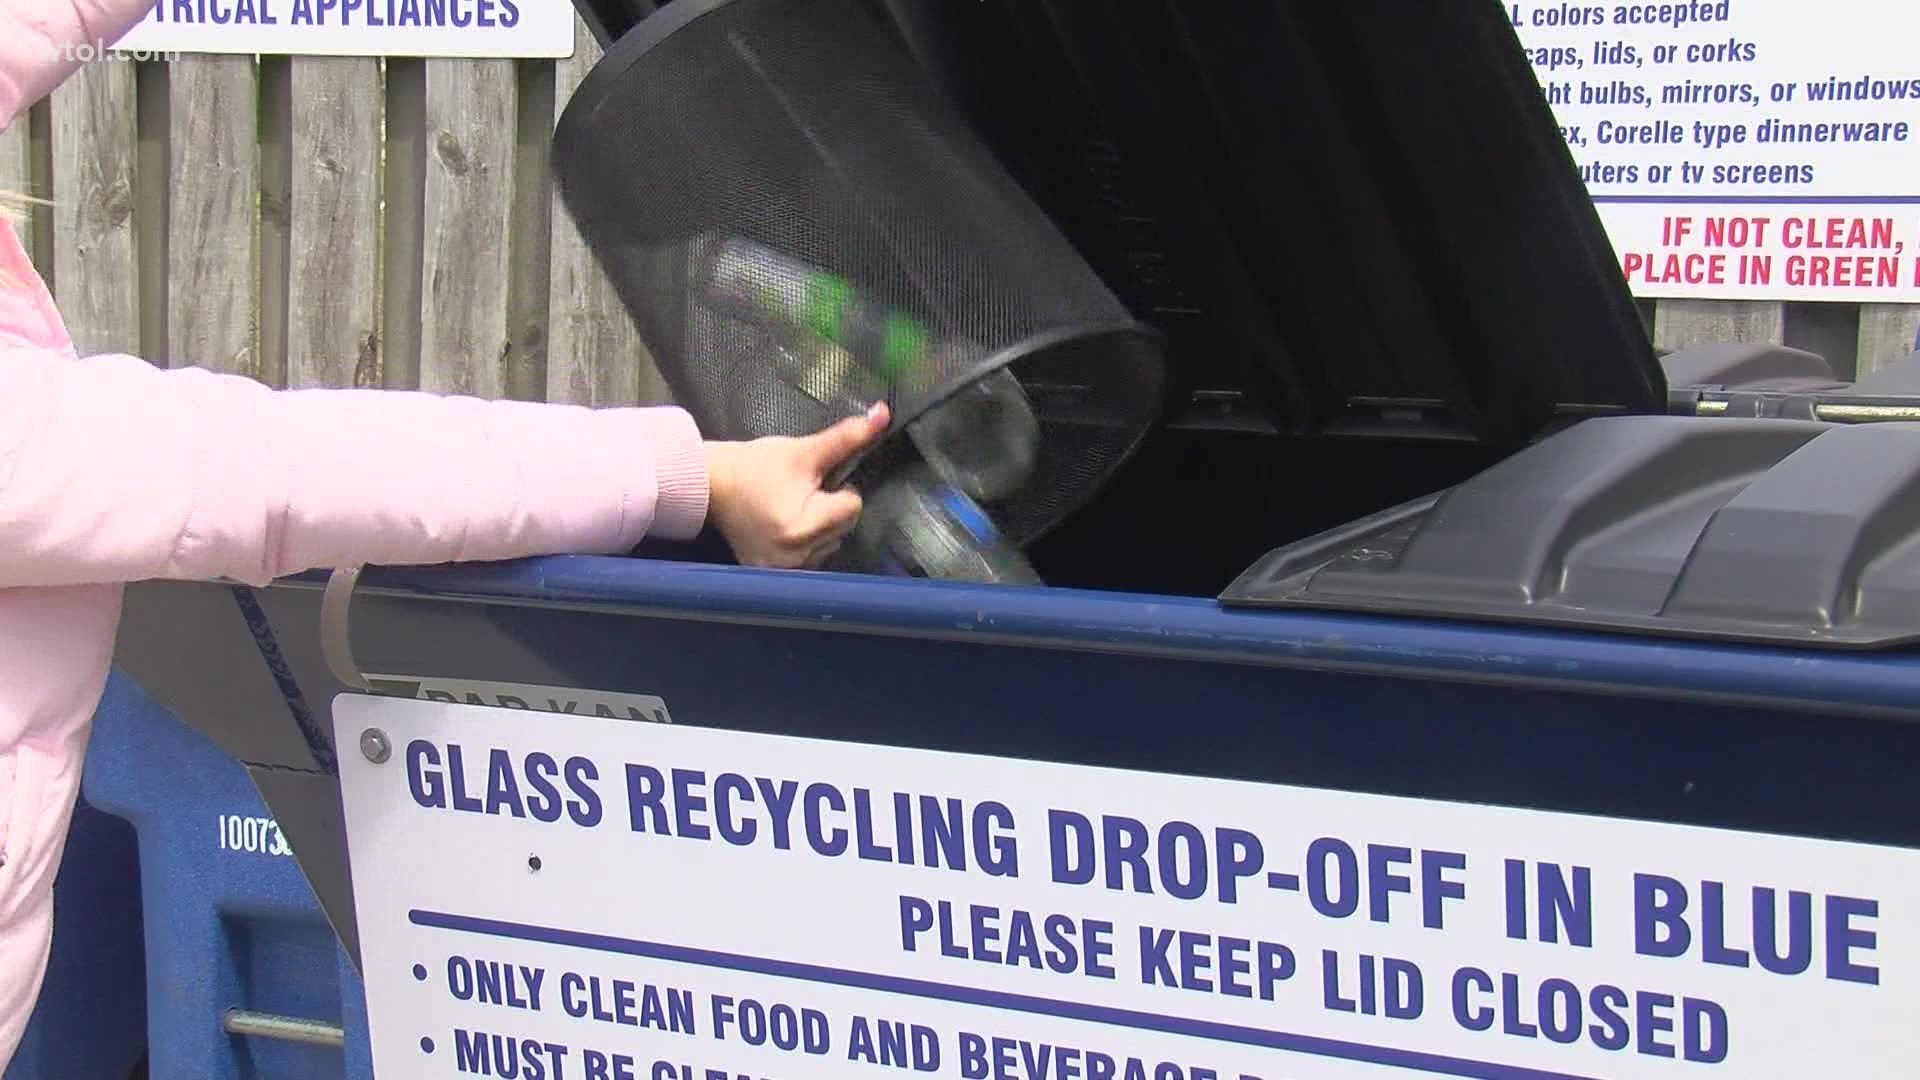 Starting May 10, glass will not be accepted curbside. Instead, glass items will need to be dropped off. O-I Glass will then turn the items into new bottles and jars.